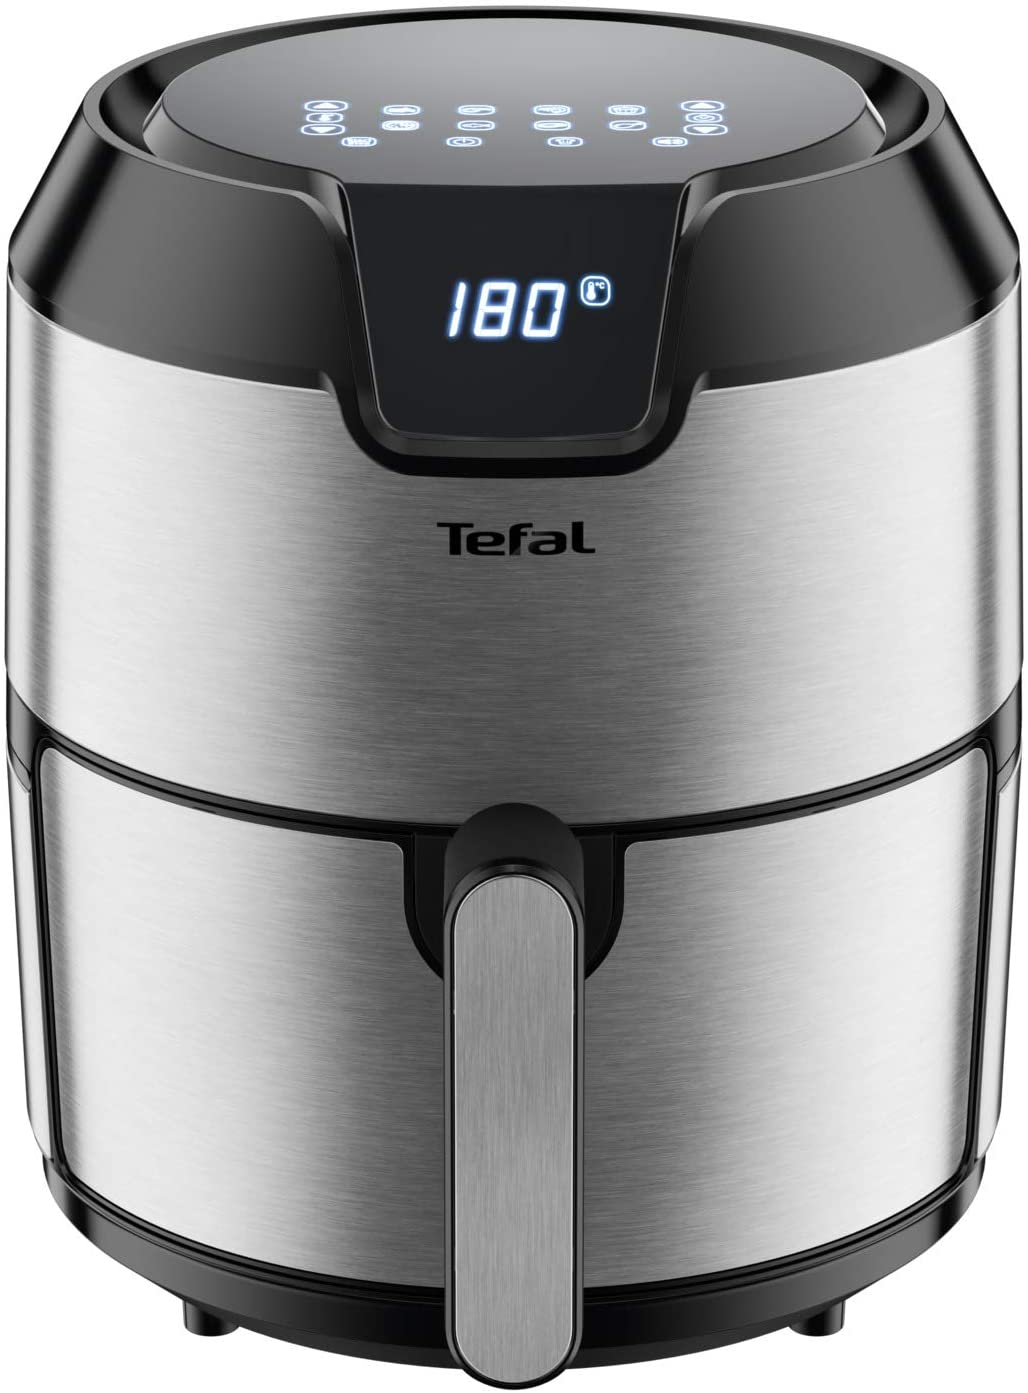 Tefal EY5058 Easy Fry & Grill Precision Hot Air Fryer | 2-in-1 Technology (Hot Air Fryer and Grill) | Digital Display | Capacity: 4.2 Litres | 8 Automatic Programmes | Black